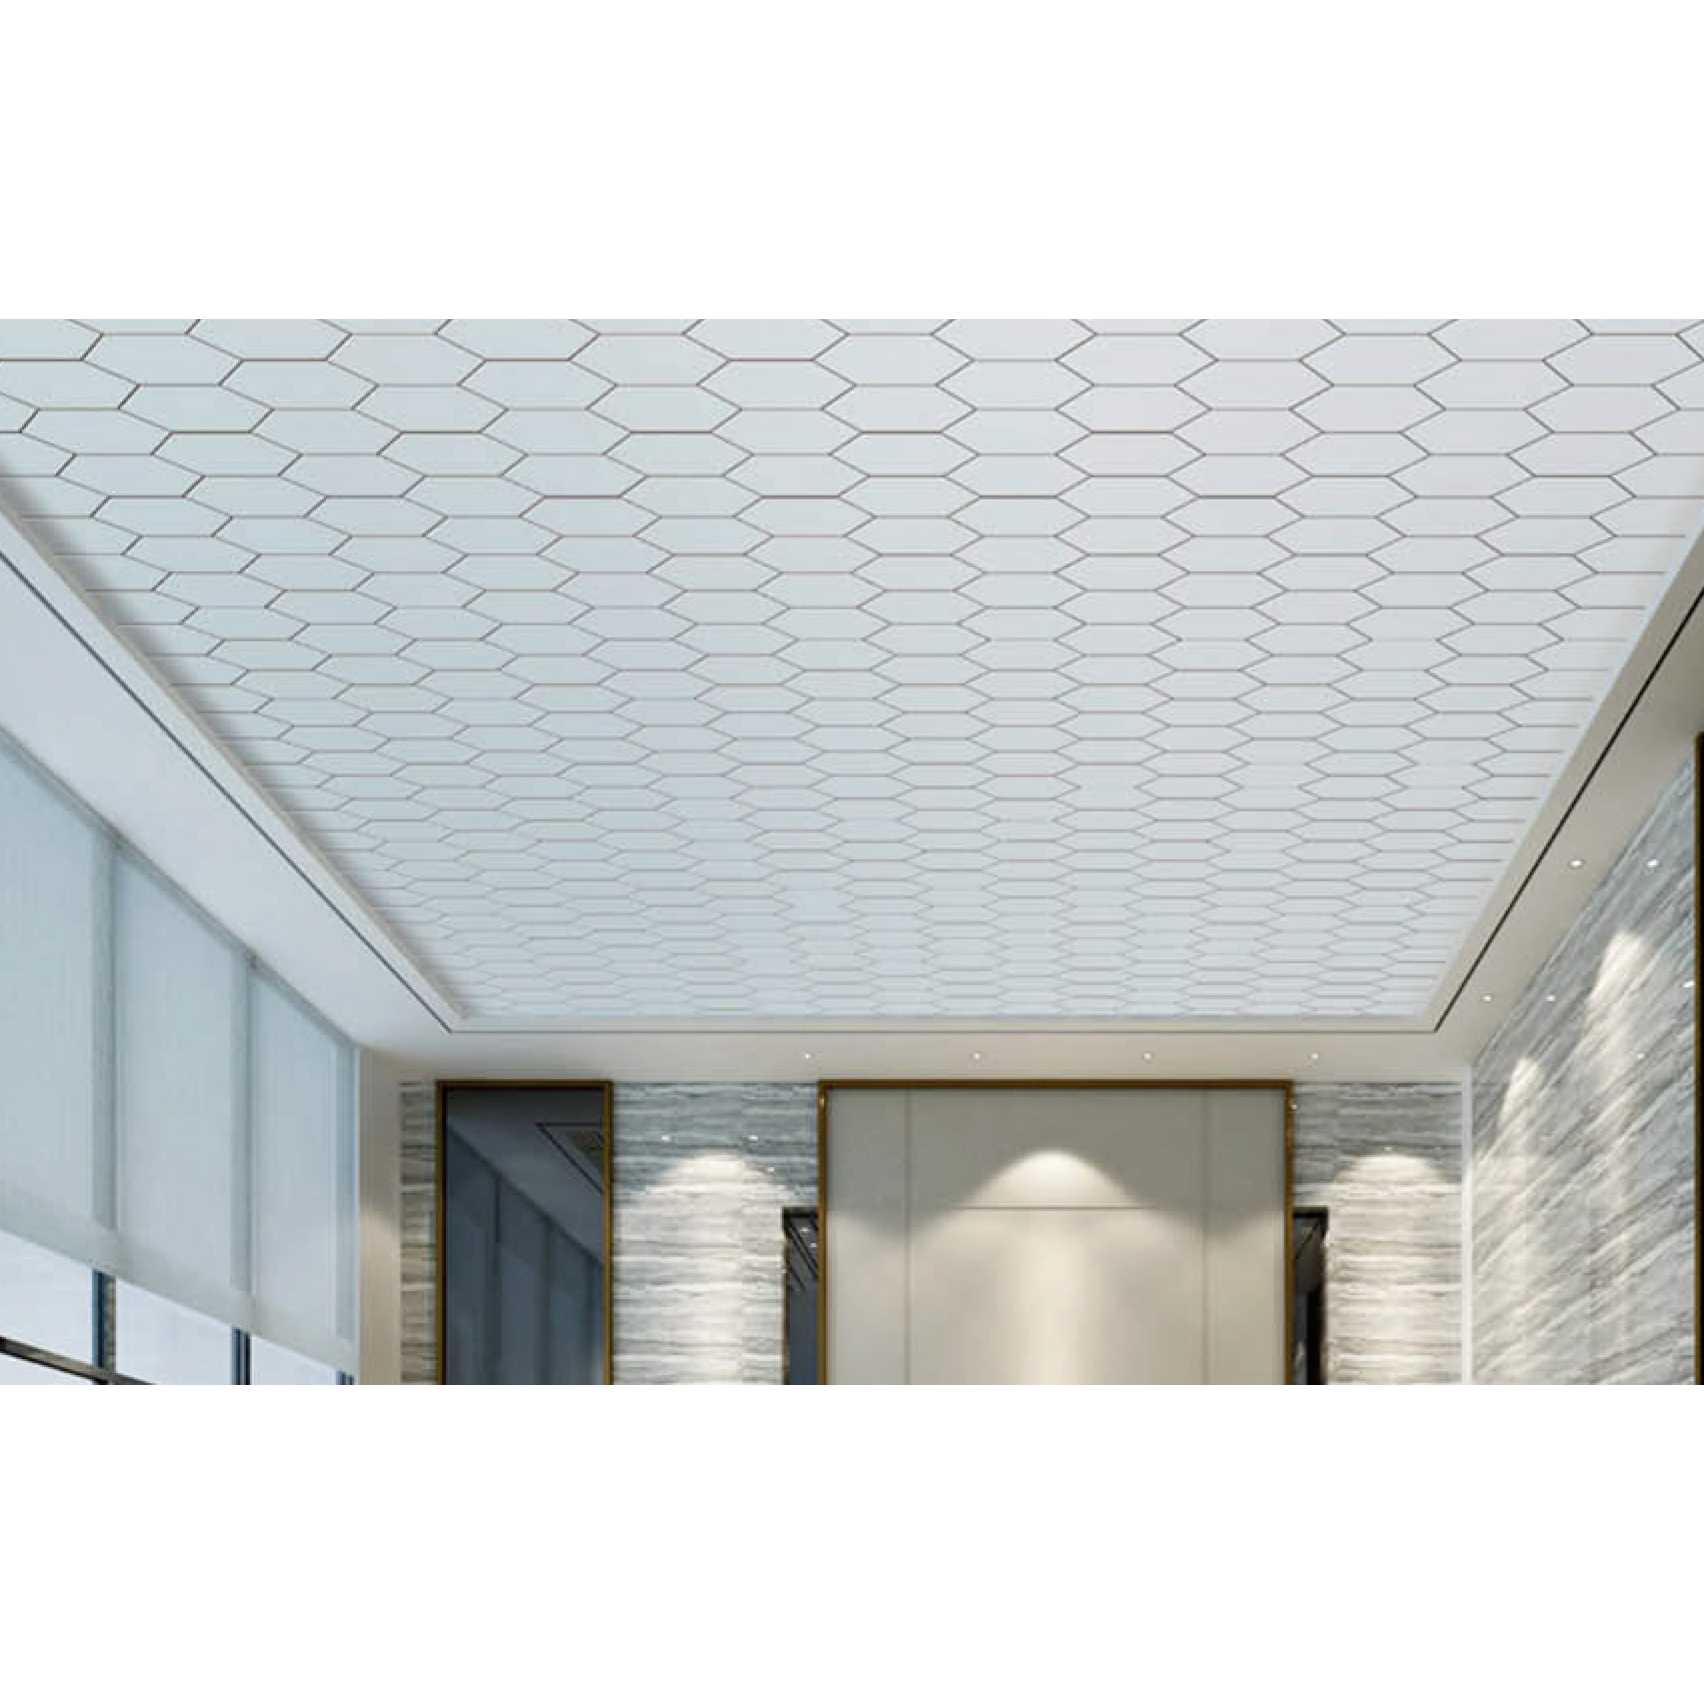 China Guangdong Insulated Home Decor Interior Decoration Metal Tiles  Ceiling Panels